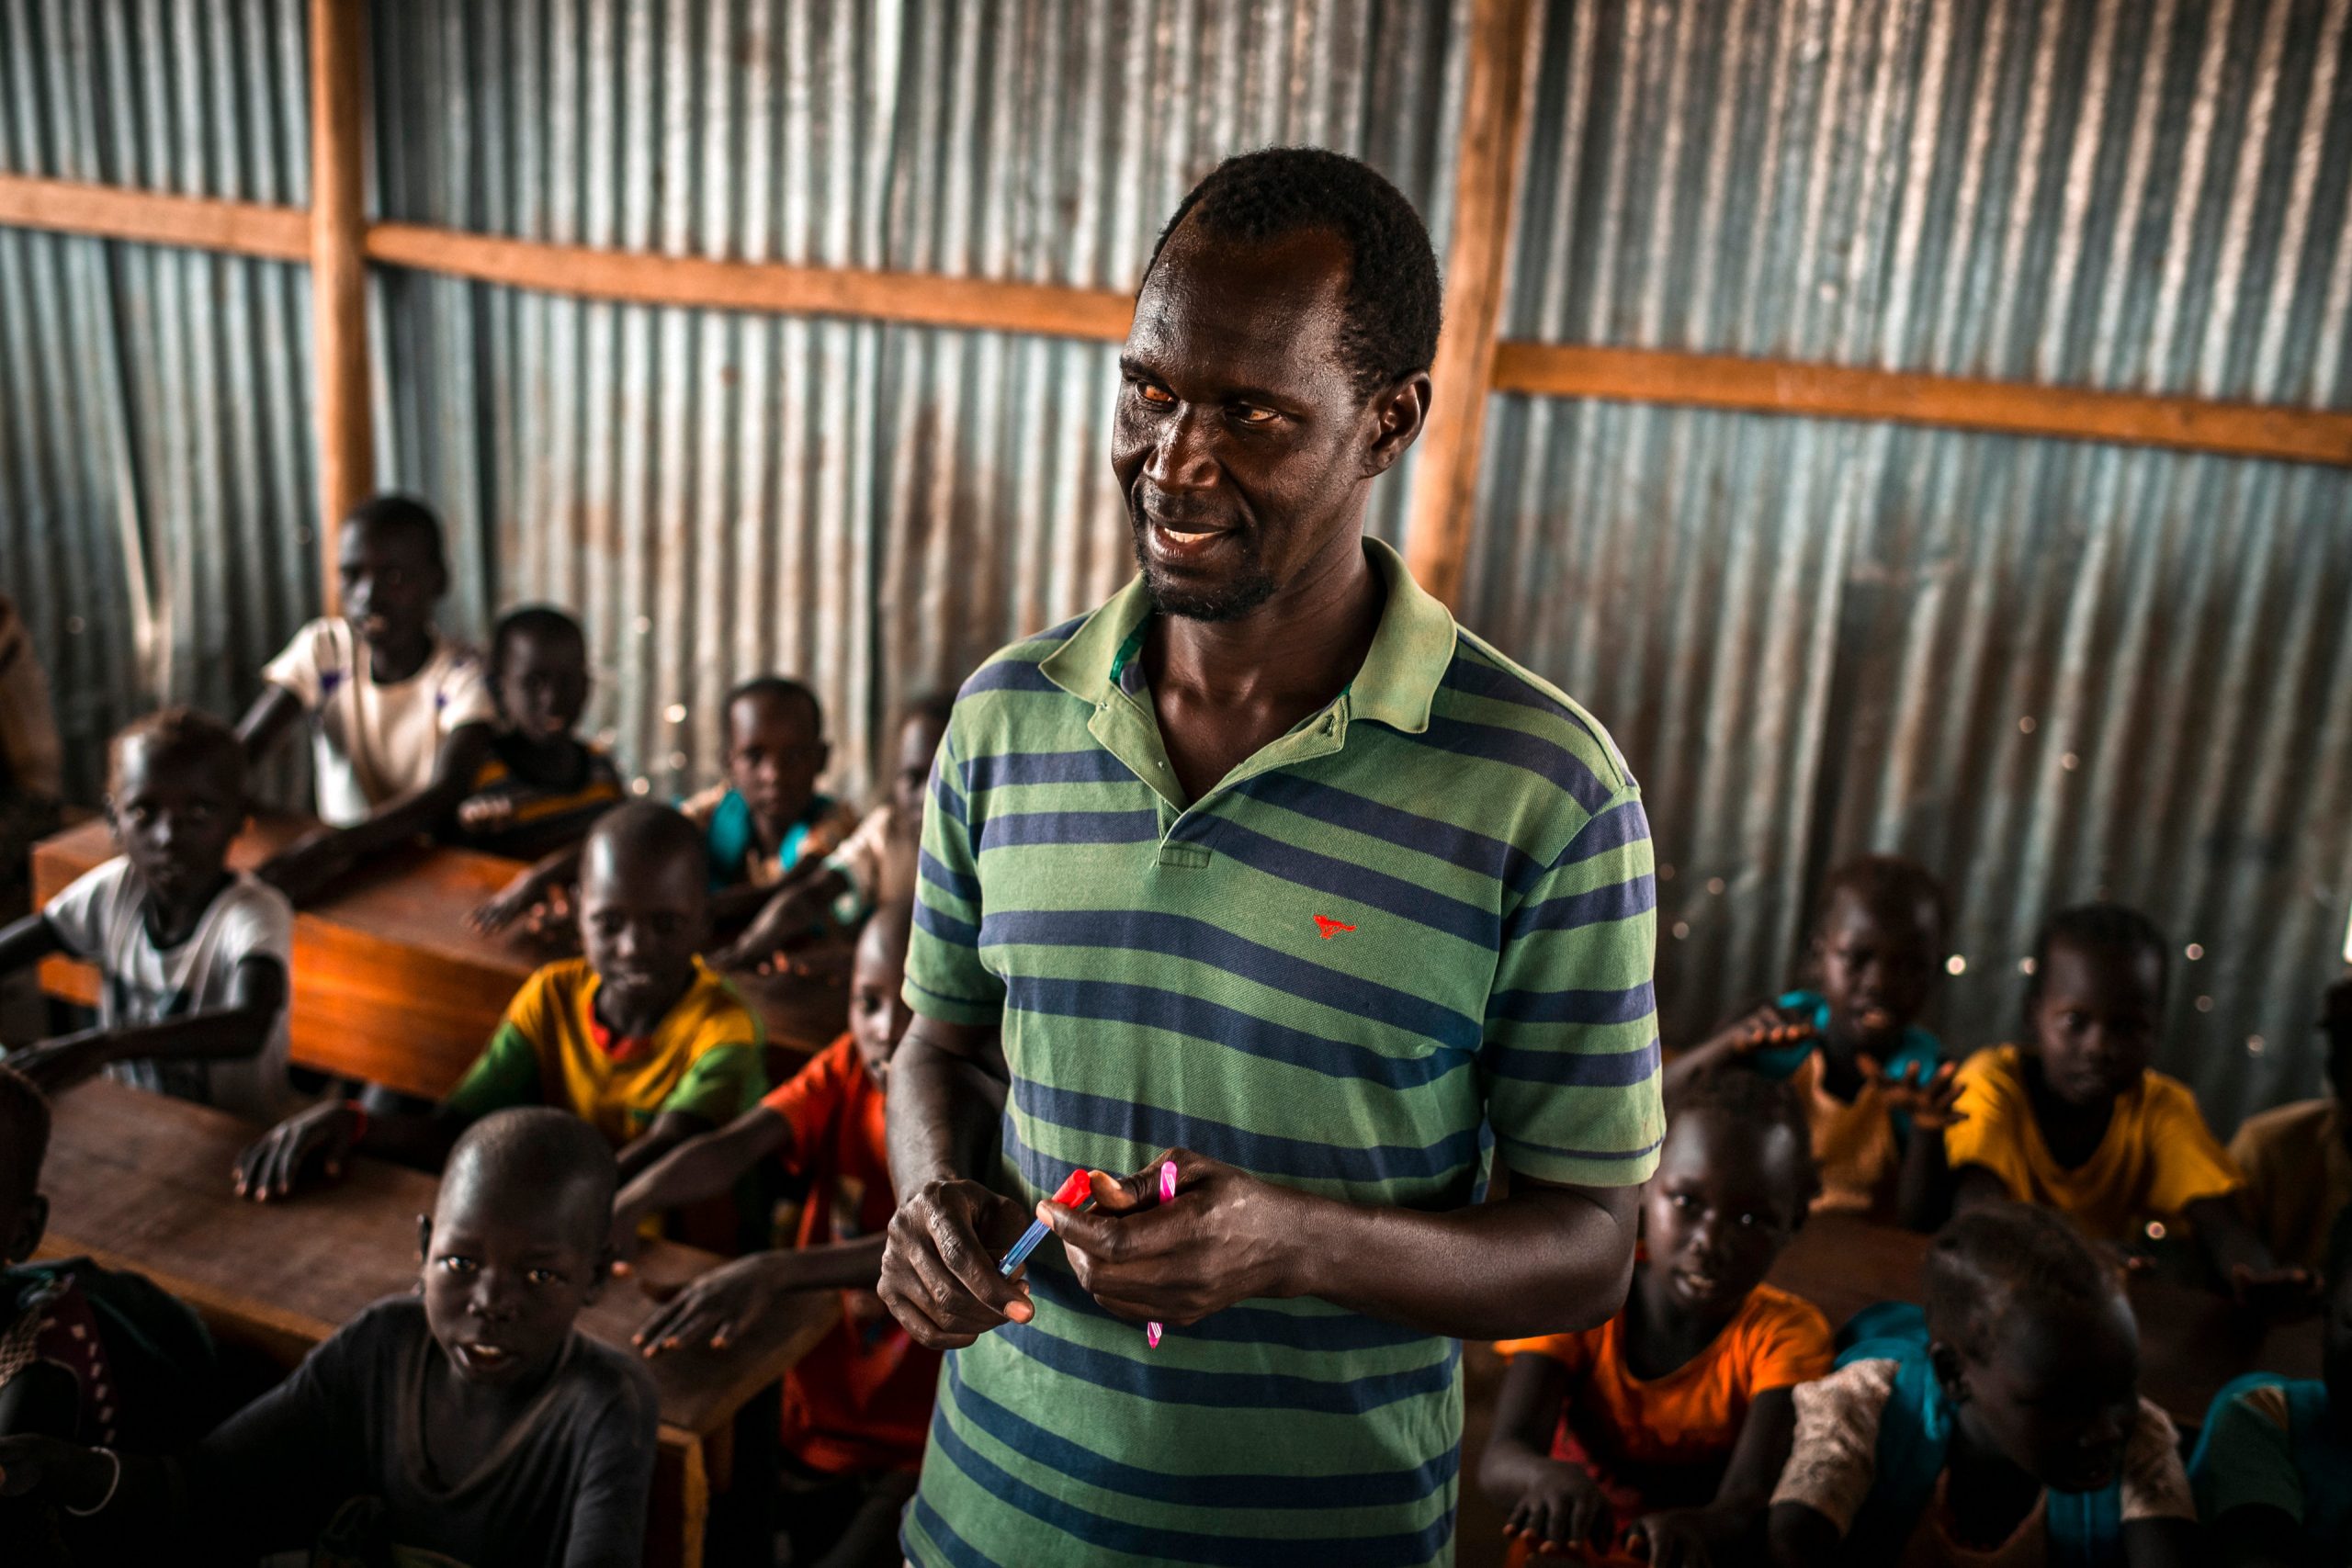 Quality vs Quantity: The challenges of providing education to refugees in Kenya